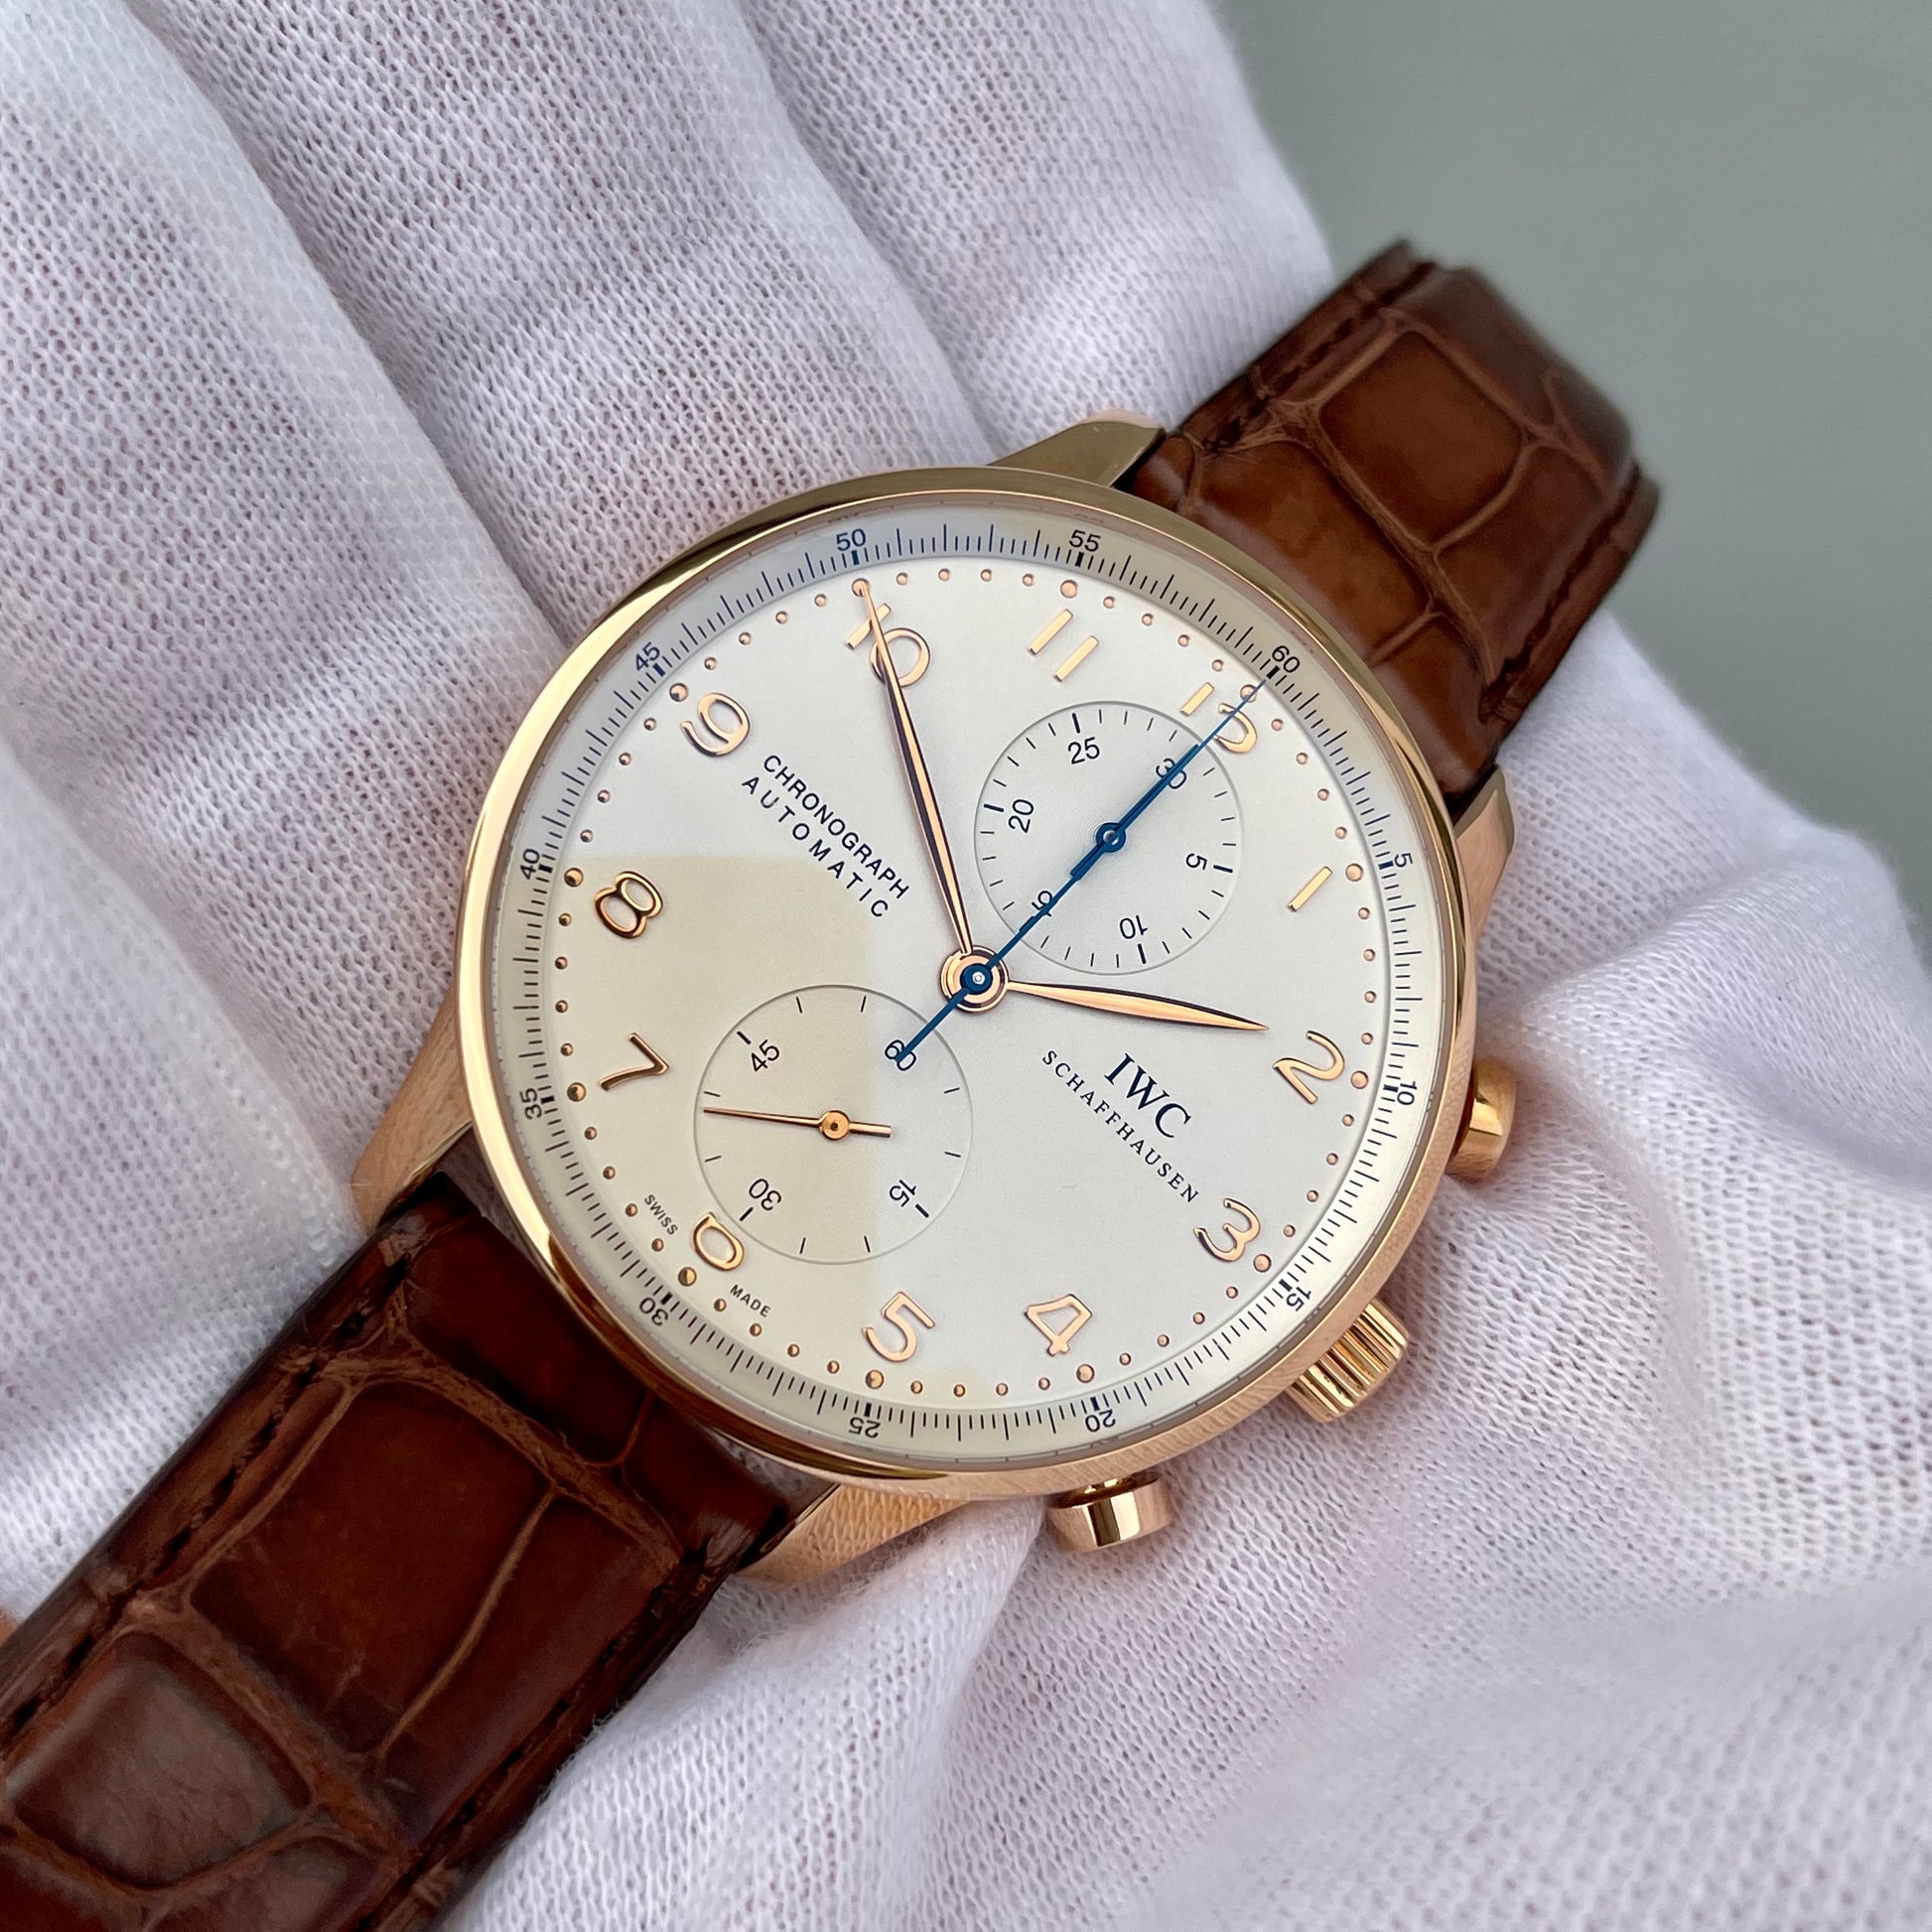 2020 IWC Portugieser IW371480 18K Rose Gold Automatic Chronograph Wristwatch Box Papers - Hashtag Watch Company